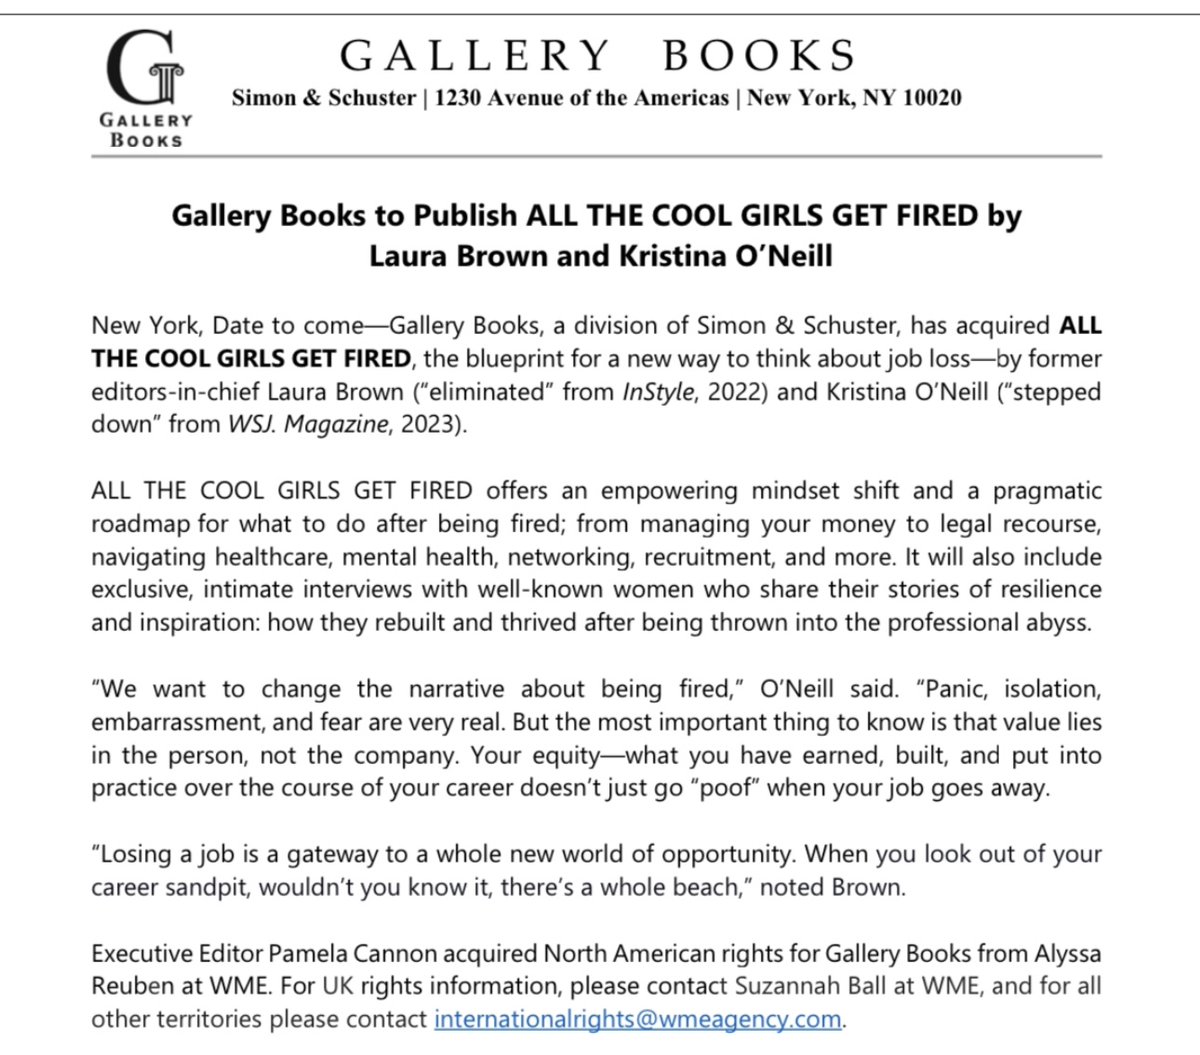 Writing a book! ‘All The Cool Girls Get Fired,’ by me and Kristina O’Neill is a powerful mindset shift and roadmap for what to do after being fired. We’d love to hear your stories on moving on after losing your job. Email contact@allthecoolgirlsgetfired.com. #leanout